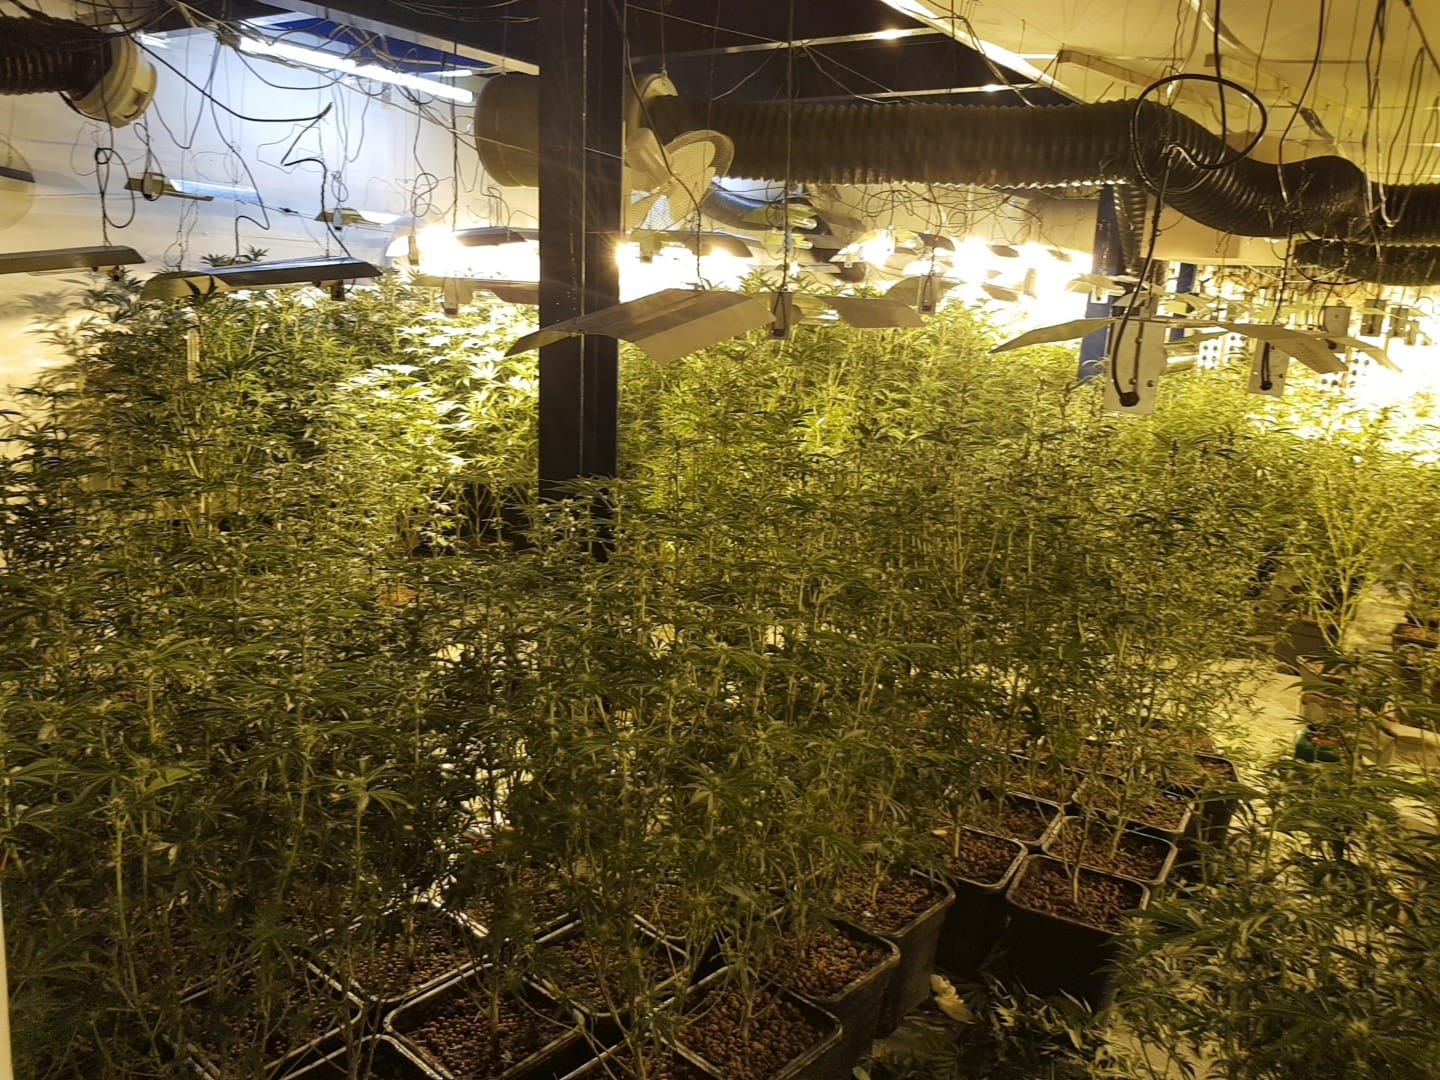 Dozens of plants crammed into a room under bright lights